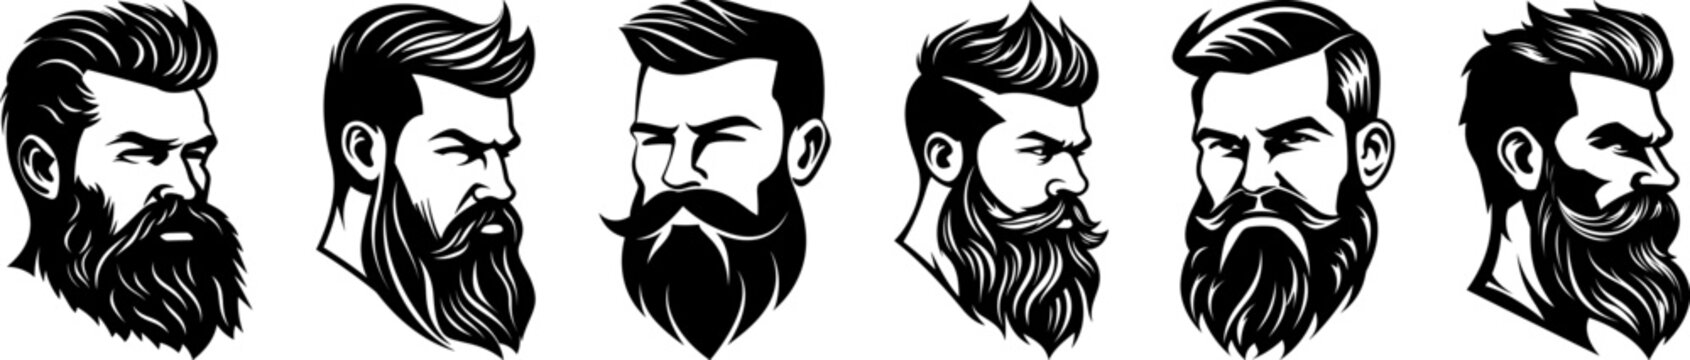 Man face portrait with full beard moustache and haircut black silhouette vector collection